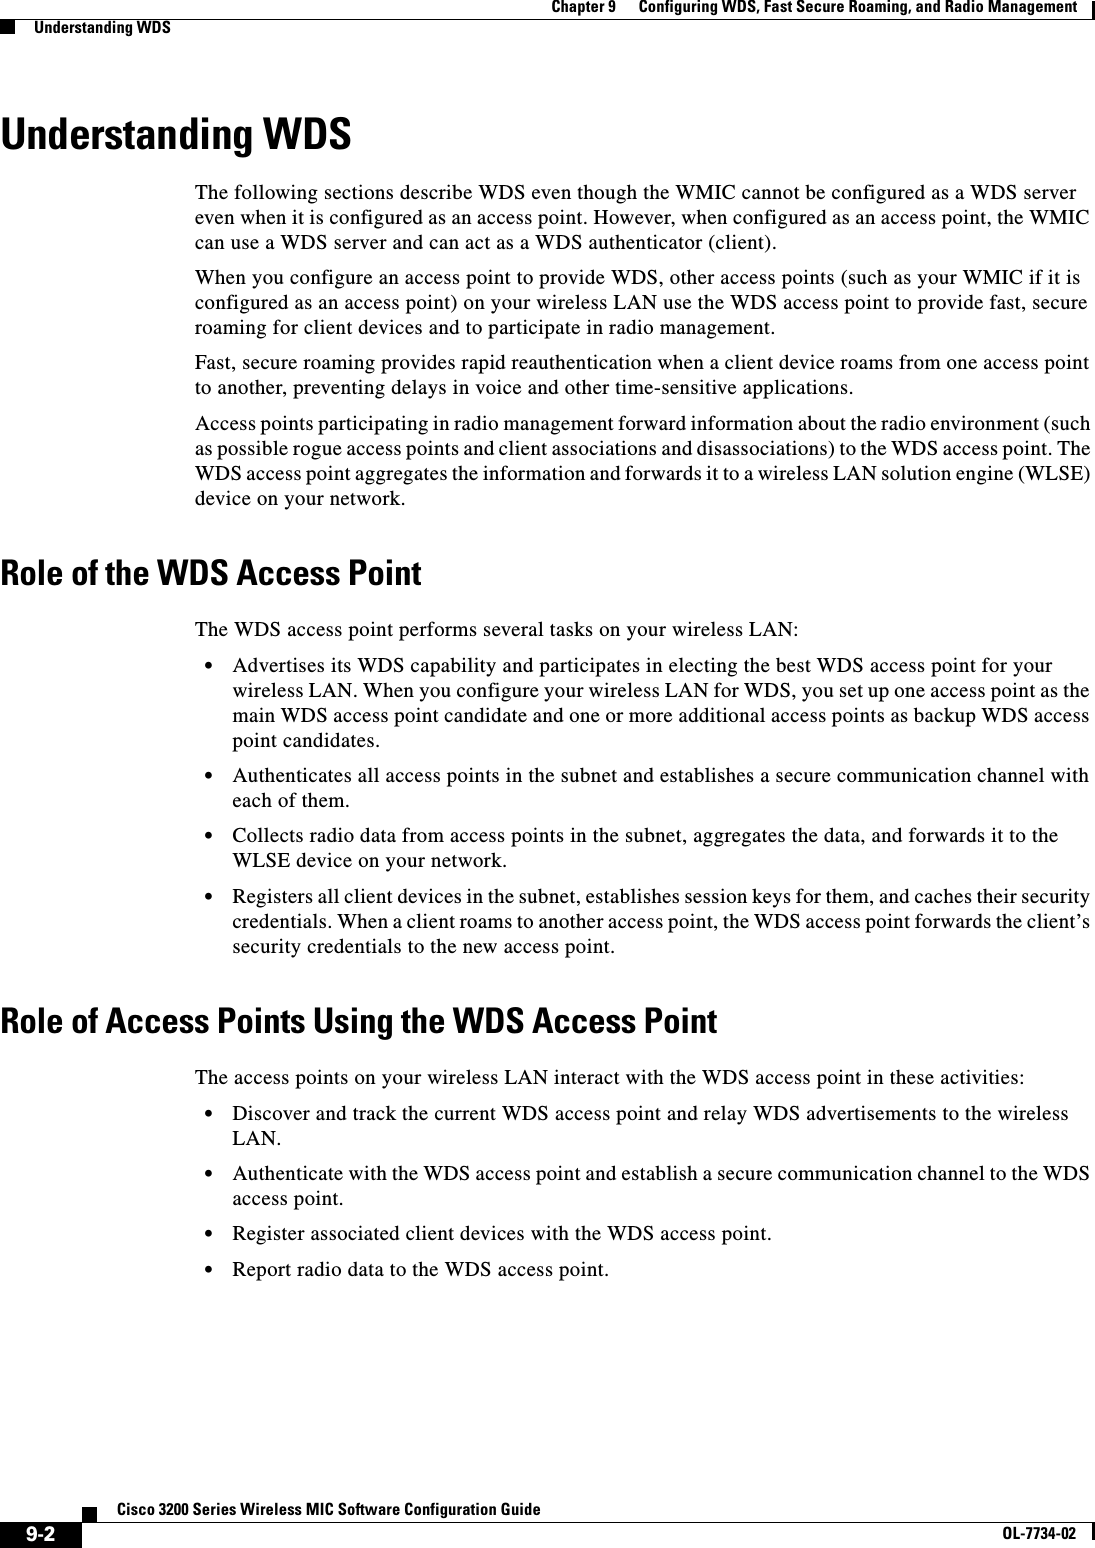 9-2Cisco 3200 Series Wireless MIC Software Configuration GuideOL-7734-02Chapter 9      Configuring WDS, Fast Secure Roaming, and Radio ManagementUnderstanding WDSUnderstanding WDSThe following sections describe WDS even though the WMIC cannot be configured as a WDS server even when it is configured as an access point. However, when configured as an access point, the WMIC can use a WDS server and can act as a WDS authenticator (client).When you configure an access point to provide WDS, other access points (such as your WMIC if it is configured as an access point) on your wireless LAN use the WDS access point to provide fast, secure roaming for client devices and to participate in radio management. Fast, secure roaming provides rapid reauthentication when a client device roams from one access point to another, preventing delays in voice and other time-sensitive applications. Access points participating in radio management forward information about the radio environment (such as possible rogue access points and client associations and disassociations) to the WDS access point. The WDS access point aggregates the information and forwards it to a wireless LAN solution engine (WLSE) device on your network. Role of the WDS Access PointThe WDS access point performs several tasks on your wireless LAN:•Advertises its WDS capability and participates in electing the best WDS access point for your wireless LAN. When you configure your wireless LAN for WDS, you set up one access point as the main WDS access point candidate and one or more additional access points as backup WDS access point candidates. •Authenticates all access points in the subnet and establishes a secure communication channel with each of them.•Collects radio data from access points in the subnet, aggregates the data, and forwards it to the WLSE device on your network.•Registers all client devices in the subnet, establishes session keys for them, and caches their security credentials. When a client roams to another access point, the WDS access point forwards the client’s security credentials to the new access point.Role of Access Points Using the WDS Access PointThe access points on your wireless LAN interact with the WDS access point in these activities:•Discover and track the current WDS access point and relay WDS advertisements to the wireless LAN.•Authenticate with the WDS access point and establish a secure communication channel to the WDS access point.•Register associated client devices with the WDS access point.•Report radio data to the WDS access point.